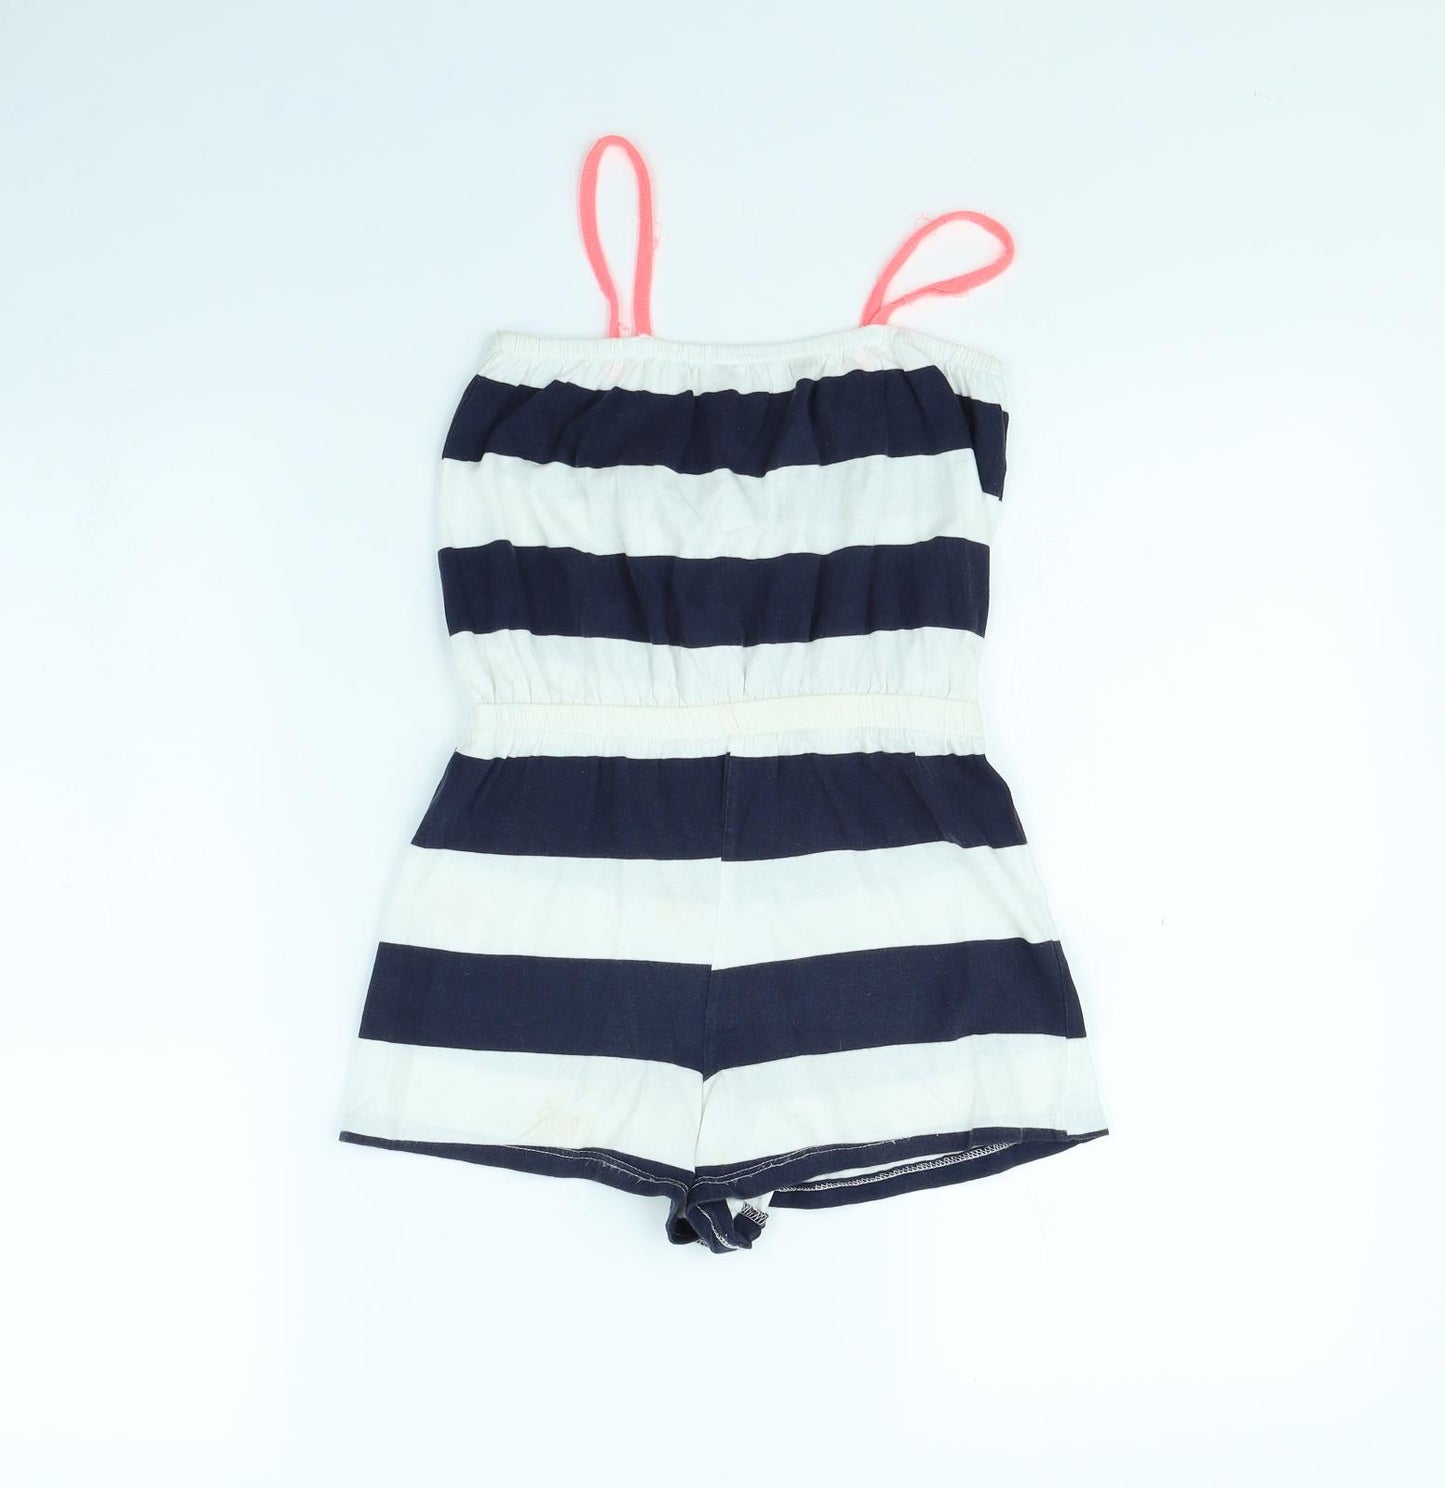 Miss Evie  Girls White Striped  Playsuit One-Piece Size 7 Years